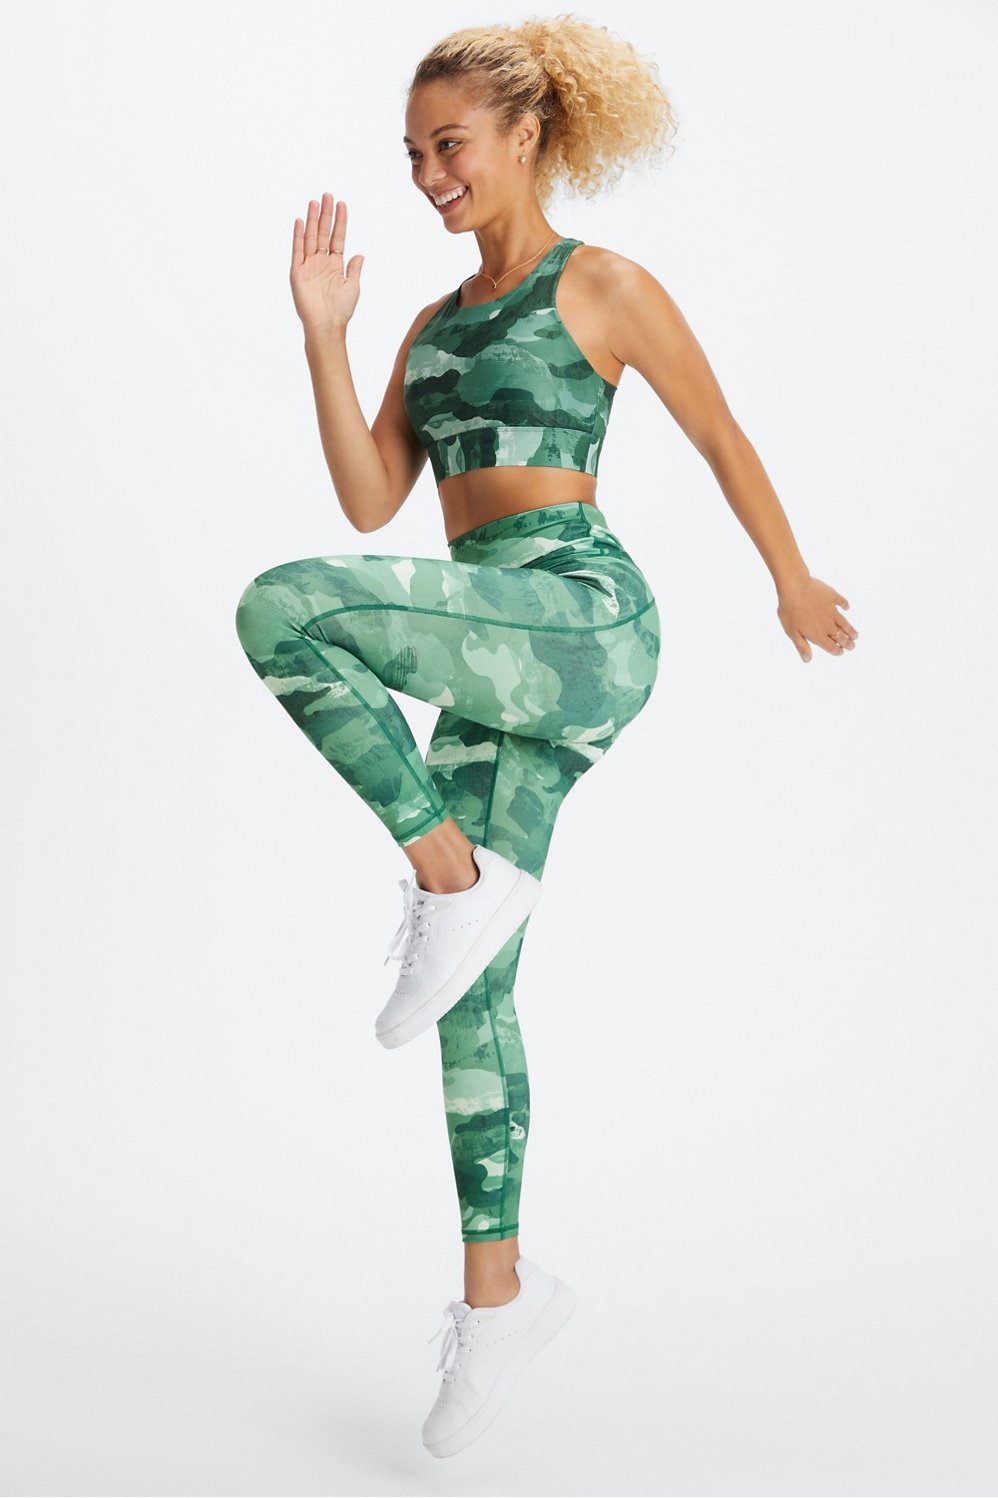 Fabletics Define PowerHold® Mid-Rise Legging Camo Print Full Length Yoga  Pant XS Multiple - $30 (60% Off Retail) - From Hoarders